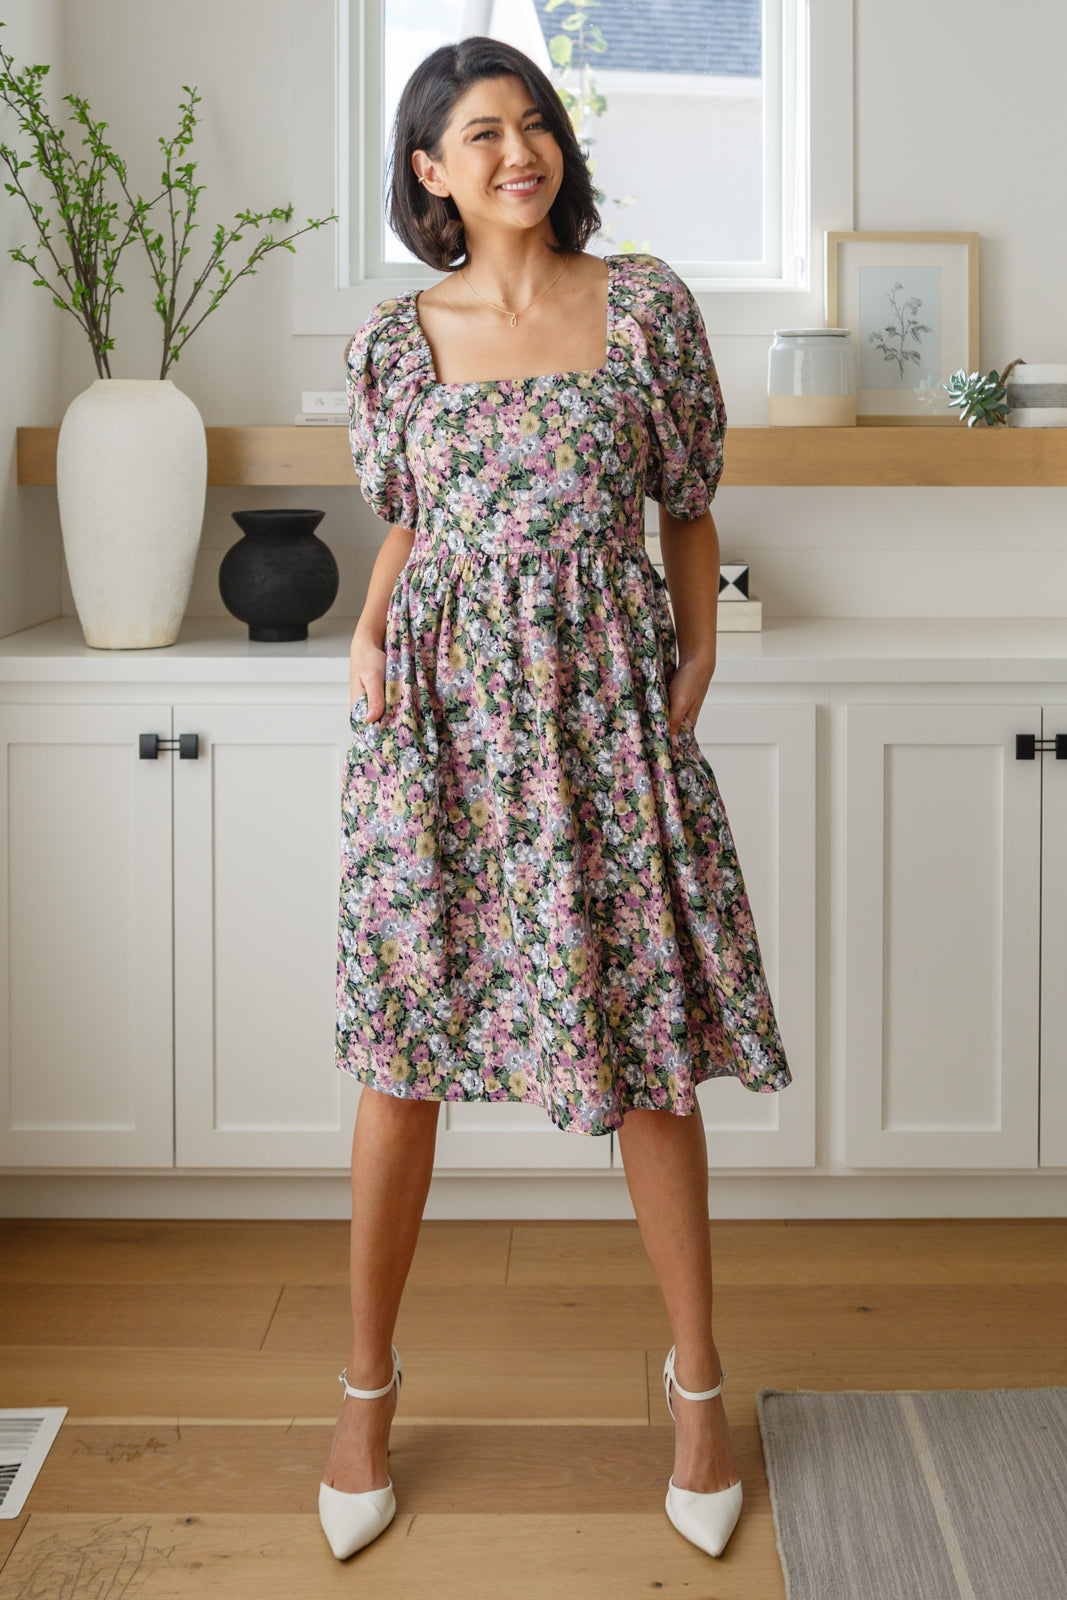 Excellence Without Effort Floral Dress - Mulberry Skies